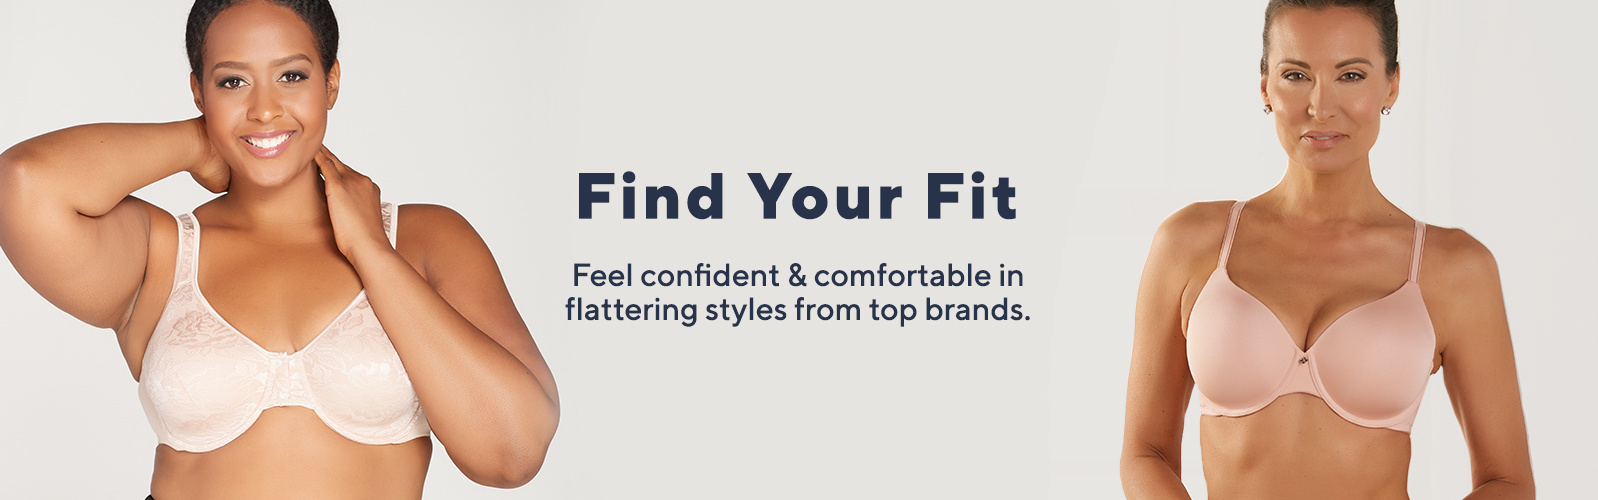 Find Your Fit  Feel confident & comfortable in flattering styles from top brands.